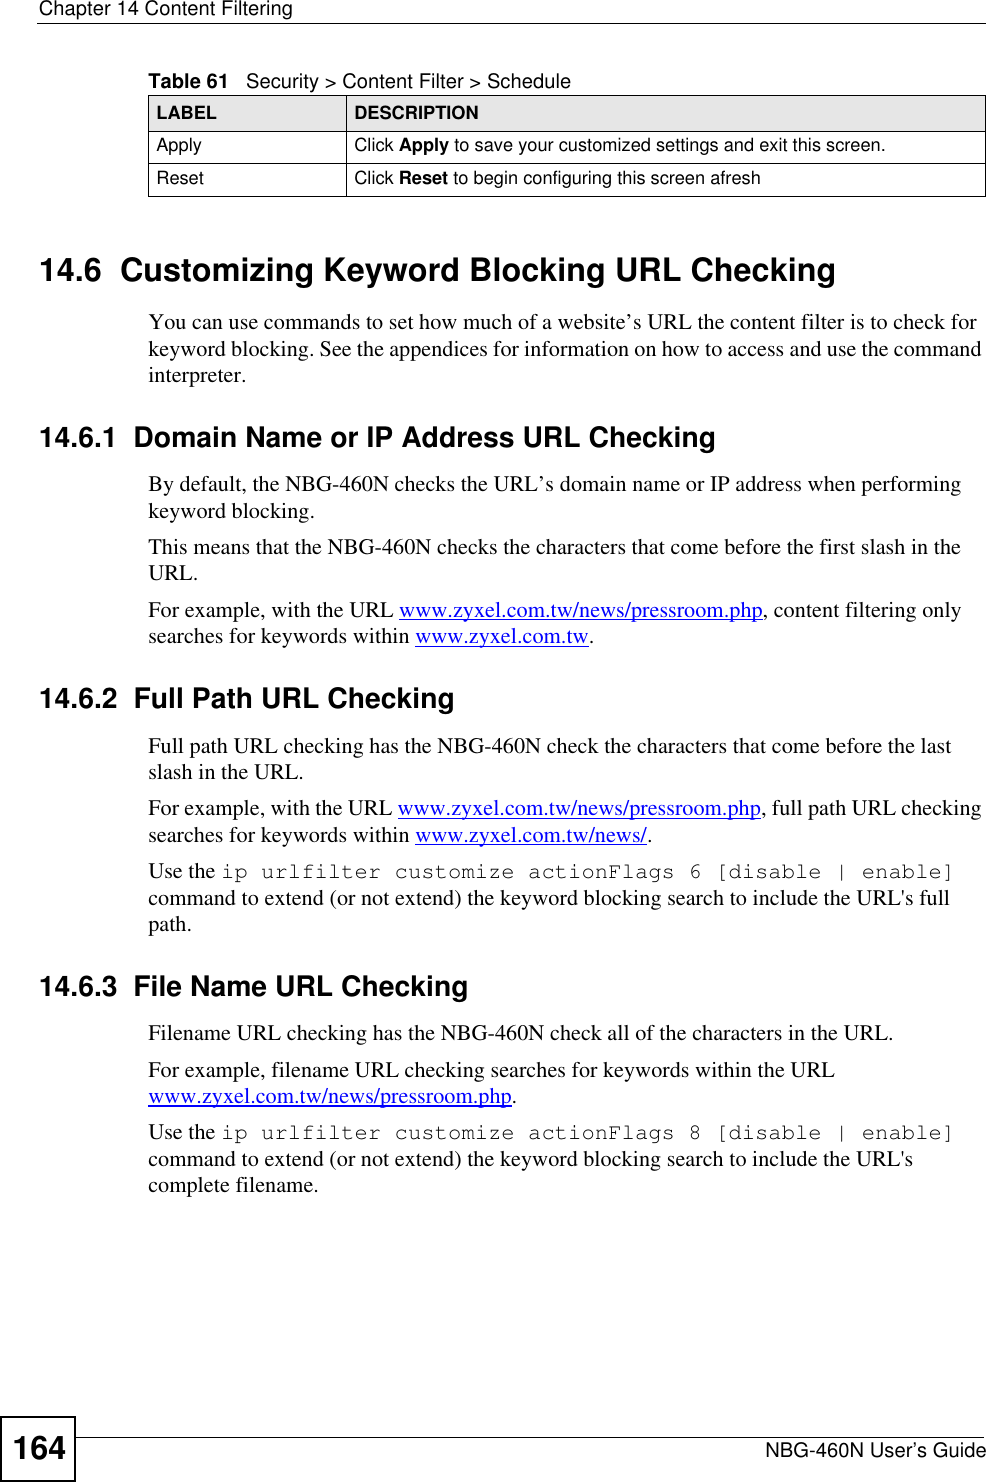 Chapter 14 Content FilteringNBG-460N User’s Guide16414.6  Customizing Keyword Blocking URL CheckingYou can use commands to set how much of a website’s URL the content filter is to check for keyword blocking. See the appendices for information on how to access and use the command interpreter.14.6.1  Domain Name or IP Address URL CheckingBy default, the NBG-460N checks the URL’s domain name or IP address when performing keyword blocking.This means that the NBG-460N checks the characters that come before the first slash in the URL.For example, with the URL www.zyxel.com.tw/news/pressroom.php, content filtering only searches for keywords within www.zyxel.com.tw.14.6.2  Full Path URL CheckingFull path URL checking has the NBG-460N check the characters that come before the last slash in the URL.For example, with the URL www.zyxel.com.tw/news/pressroom.php, full path URL checking searches for keywords within www.zyxel.com.tw/news/.Use the ip urlfilter customize actionFlags 6 [disable | enable]command to extend (or not extend) the keyword blocking search to include the URL&apos;s full path.14.6.3  File Name URL CheckingFilename URL checking has the NBG-460N check all of the characters in the URL.For example, filename URL checking searches for keywords within the URL www.zyxel.com.tw/news/pressroom.php.Use the ip urlfilter customize actionFlags 8 [disable | enable] command to extend (or not extend) the keyword blocking search to include the URL&apos;s complete filename.Apply Click Apply to save your customized settings and exit this screen.Reset Click Reset to begin configuring this screen afreshTable 61   Security &gt; Content Filter &gt; ScheduleLABEL DESCRIPTION